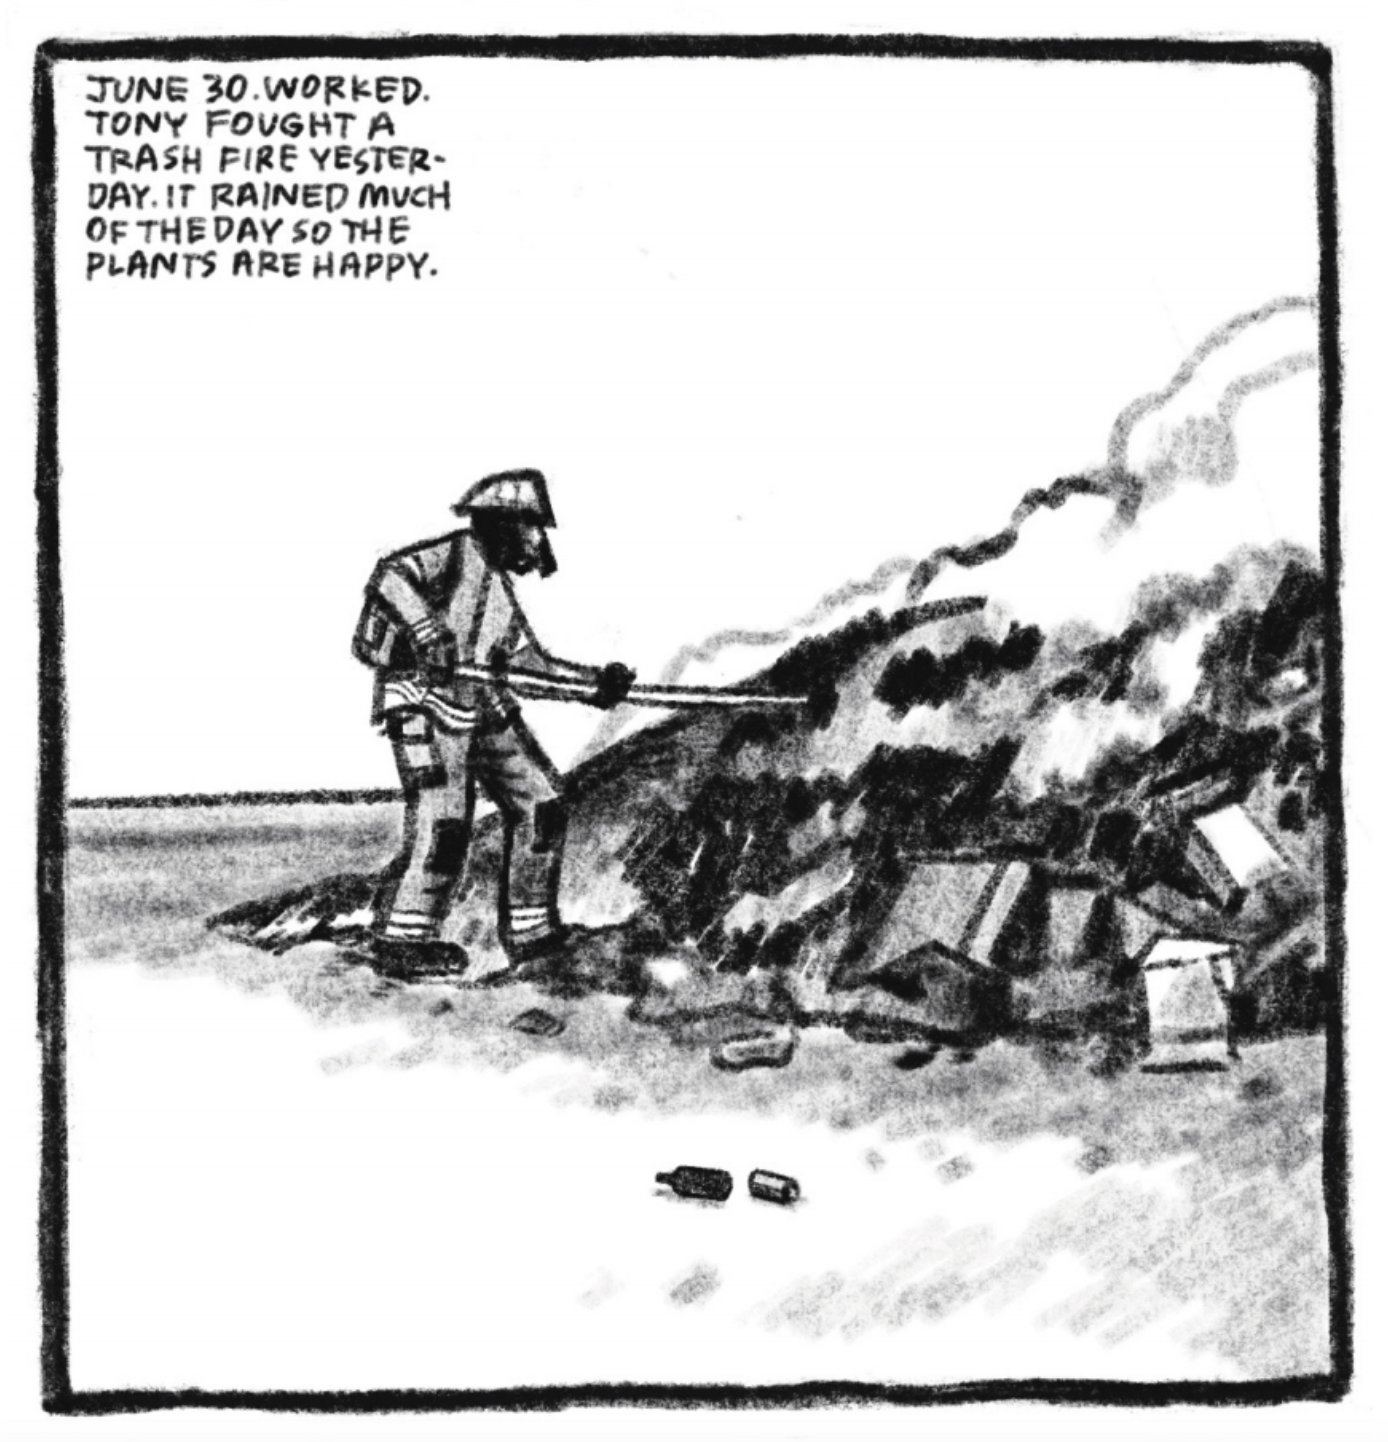 5. Tony stands in full firefighter gear in front of a large, smoking pile of trash; he is holding a long pole which he uses to prod the pile. â€œJune 30. Worked. Tony fought a trash fire yesterday. It rained much of the day so the plants are happy.â€